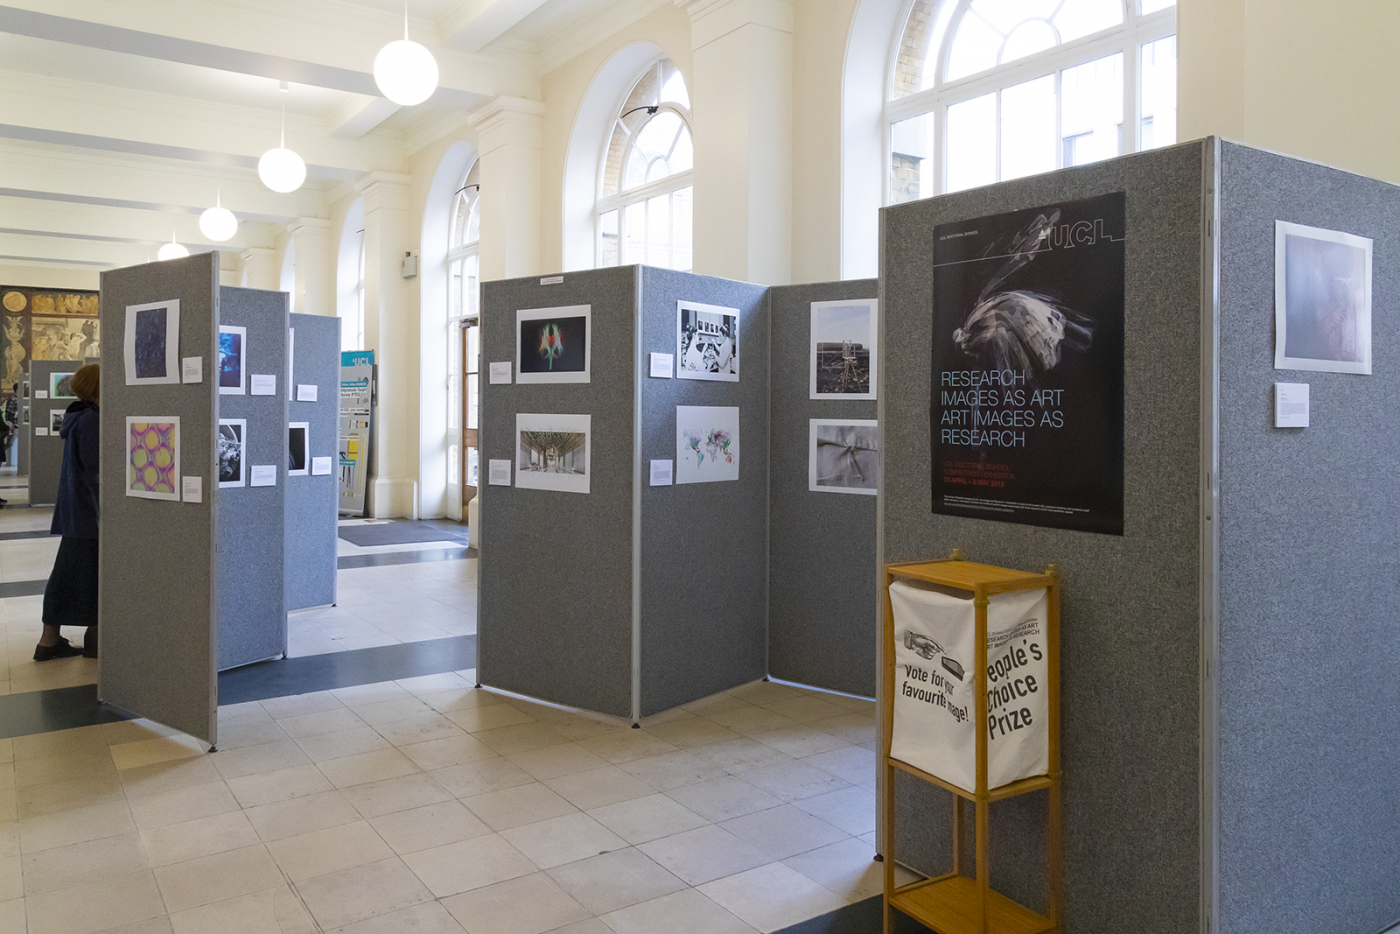 Research images as art exhibition in Cloisters